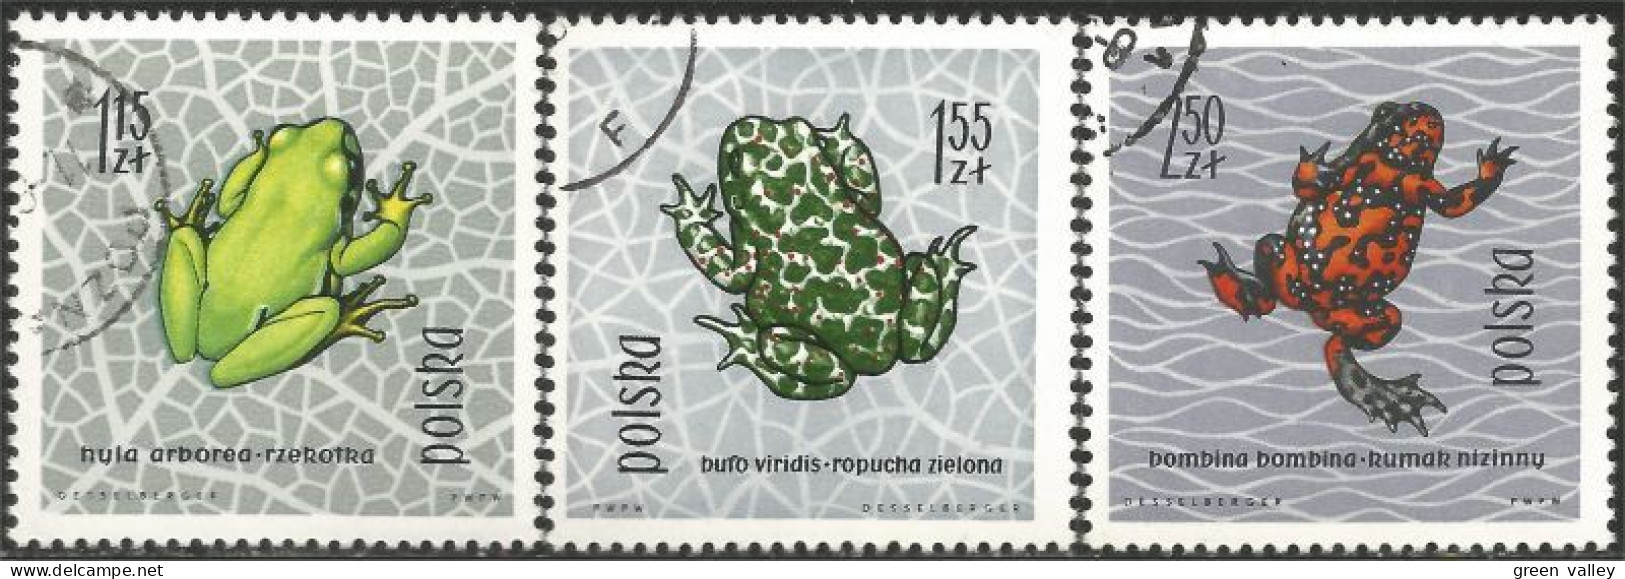 740 Pologne Grenouilles Frogs Rana Sapo Frosch (POL-217) - Frogs